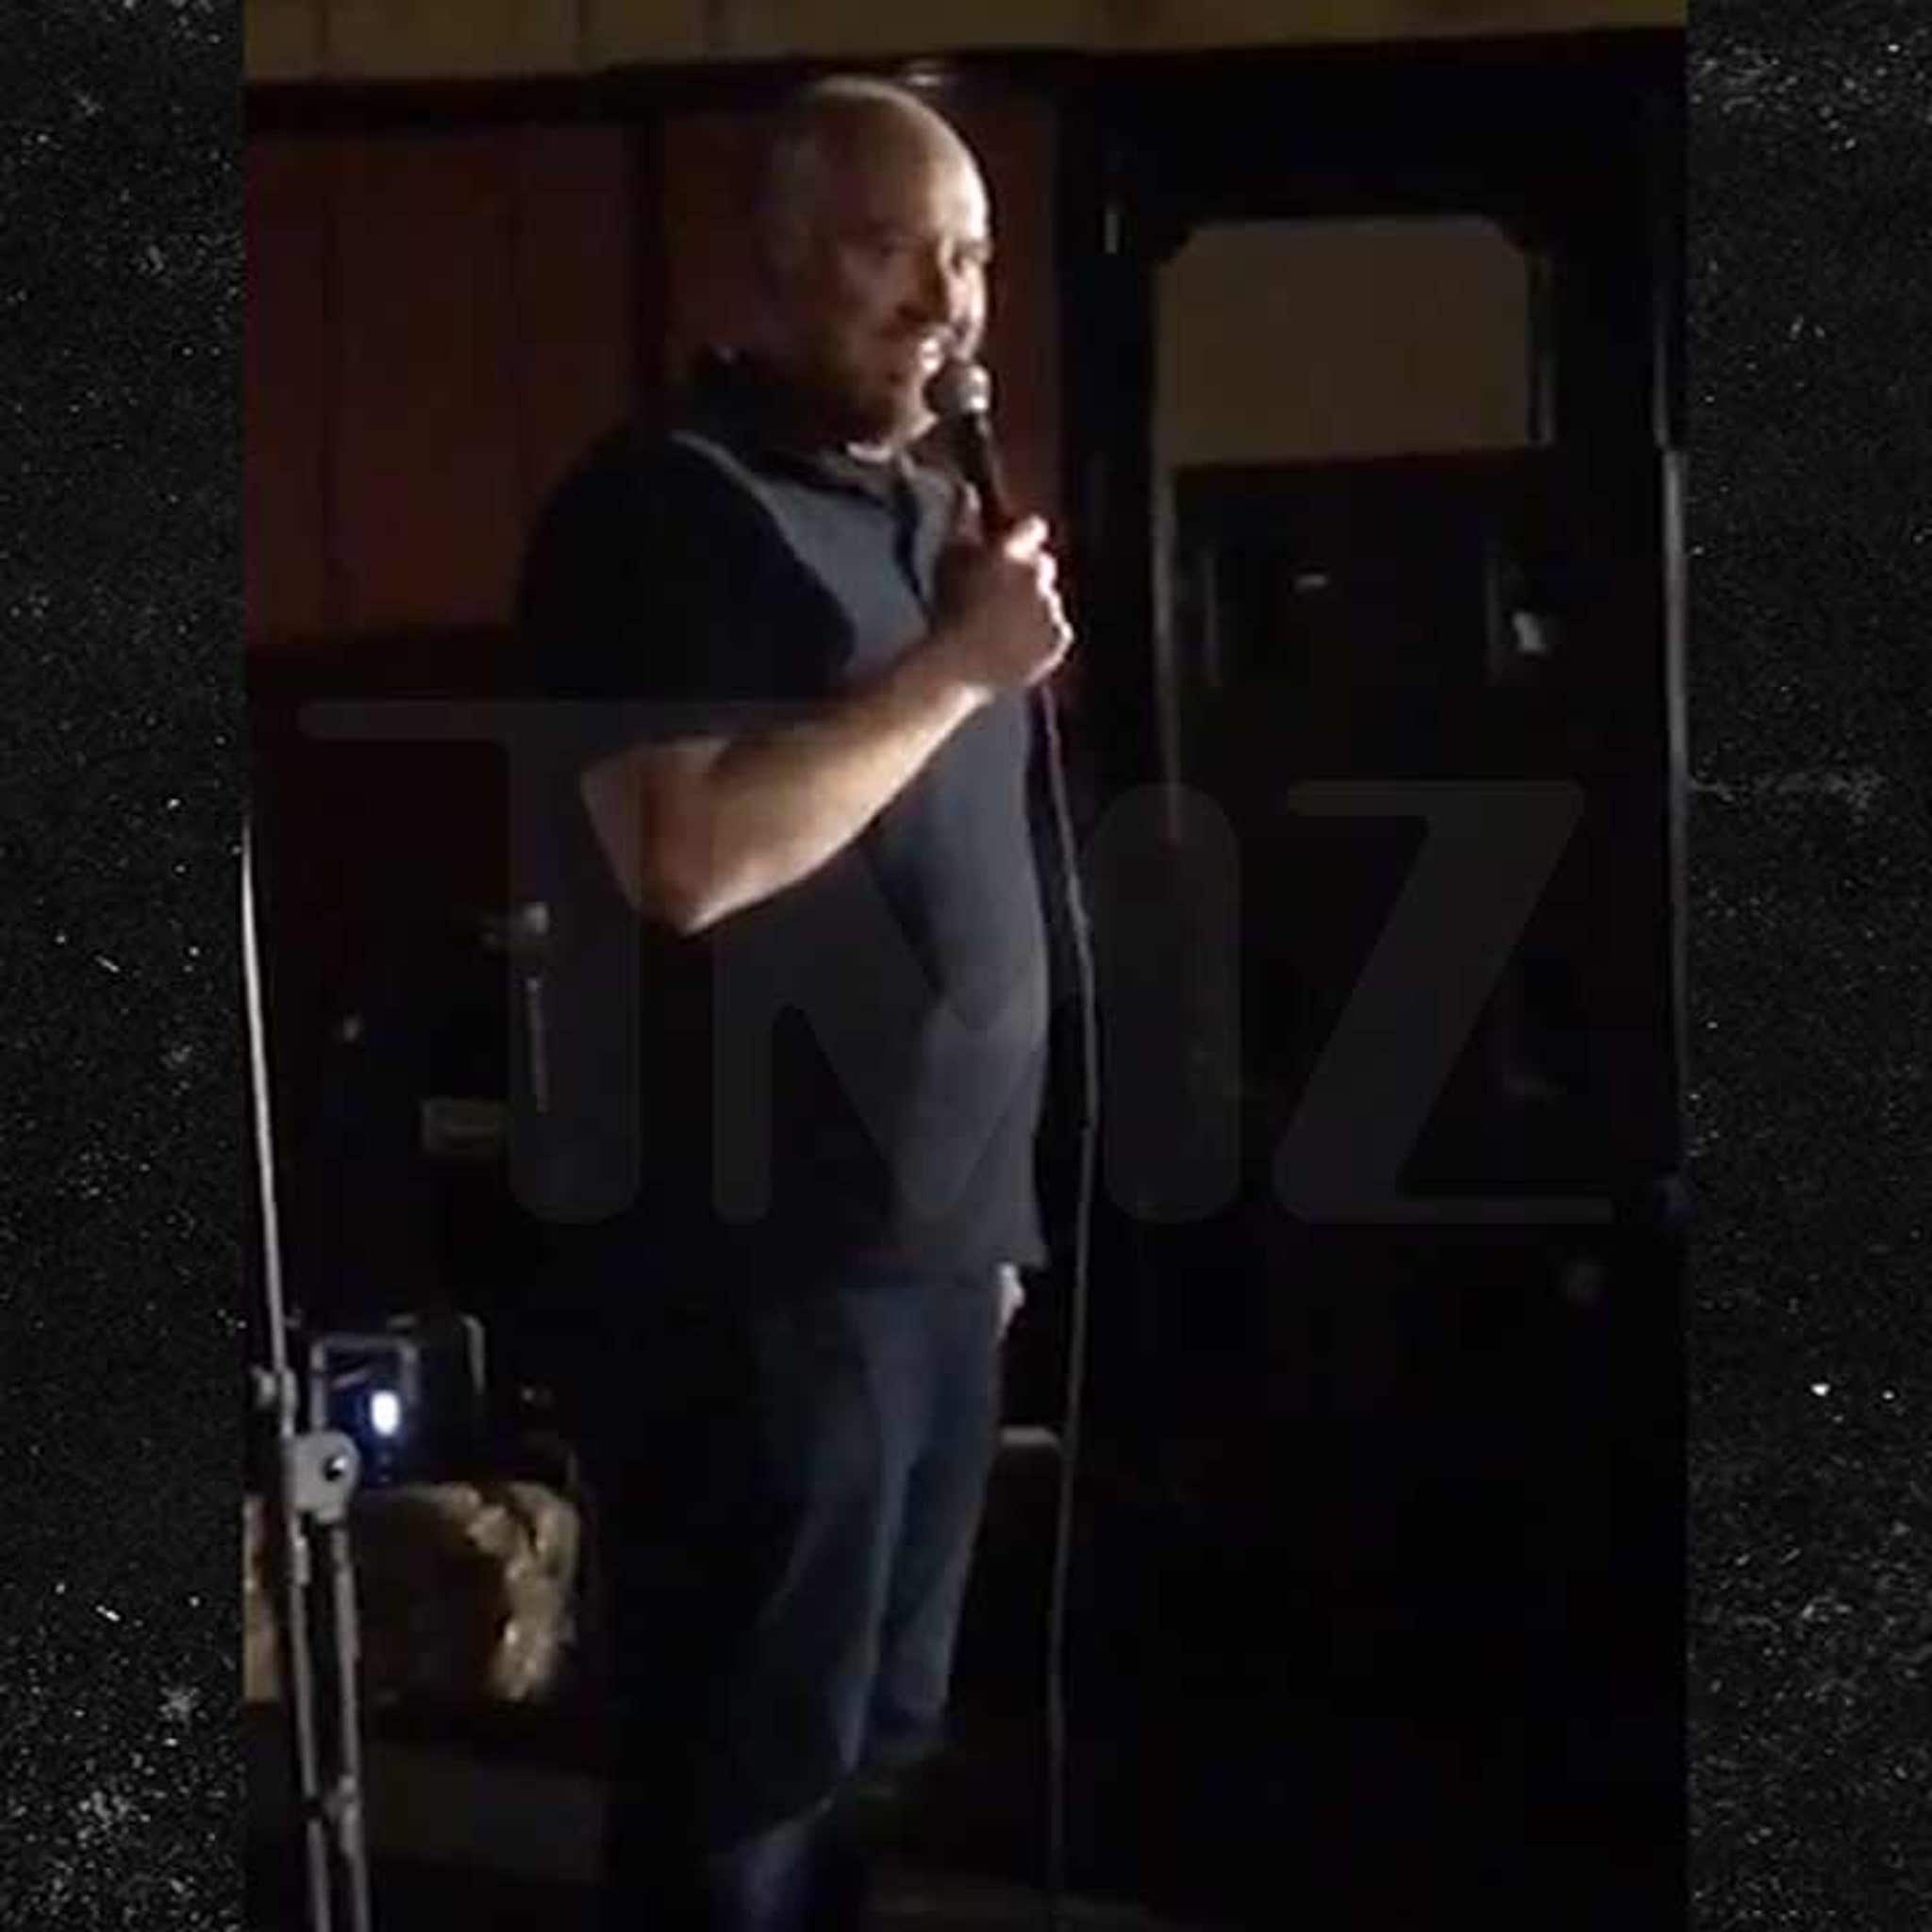 Louis C.K. Takes Cancel Culture Baton from Chappelle in 'Sorry' - Hollywood  in Toto